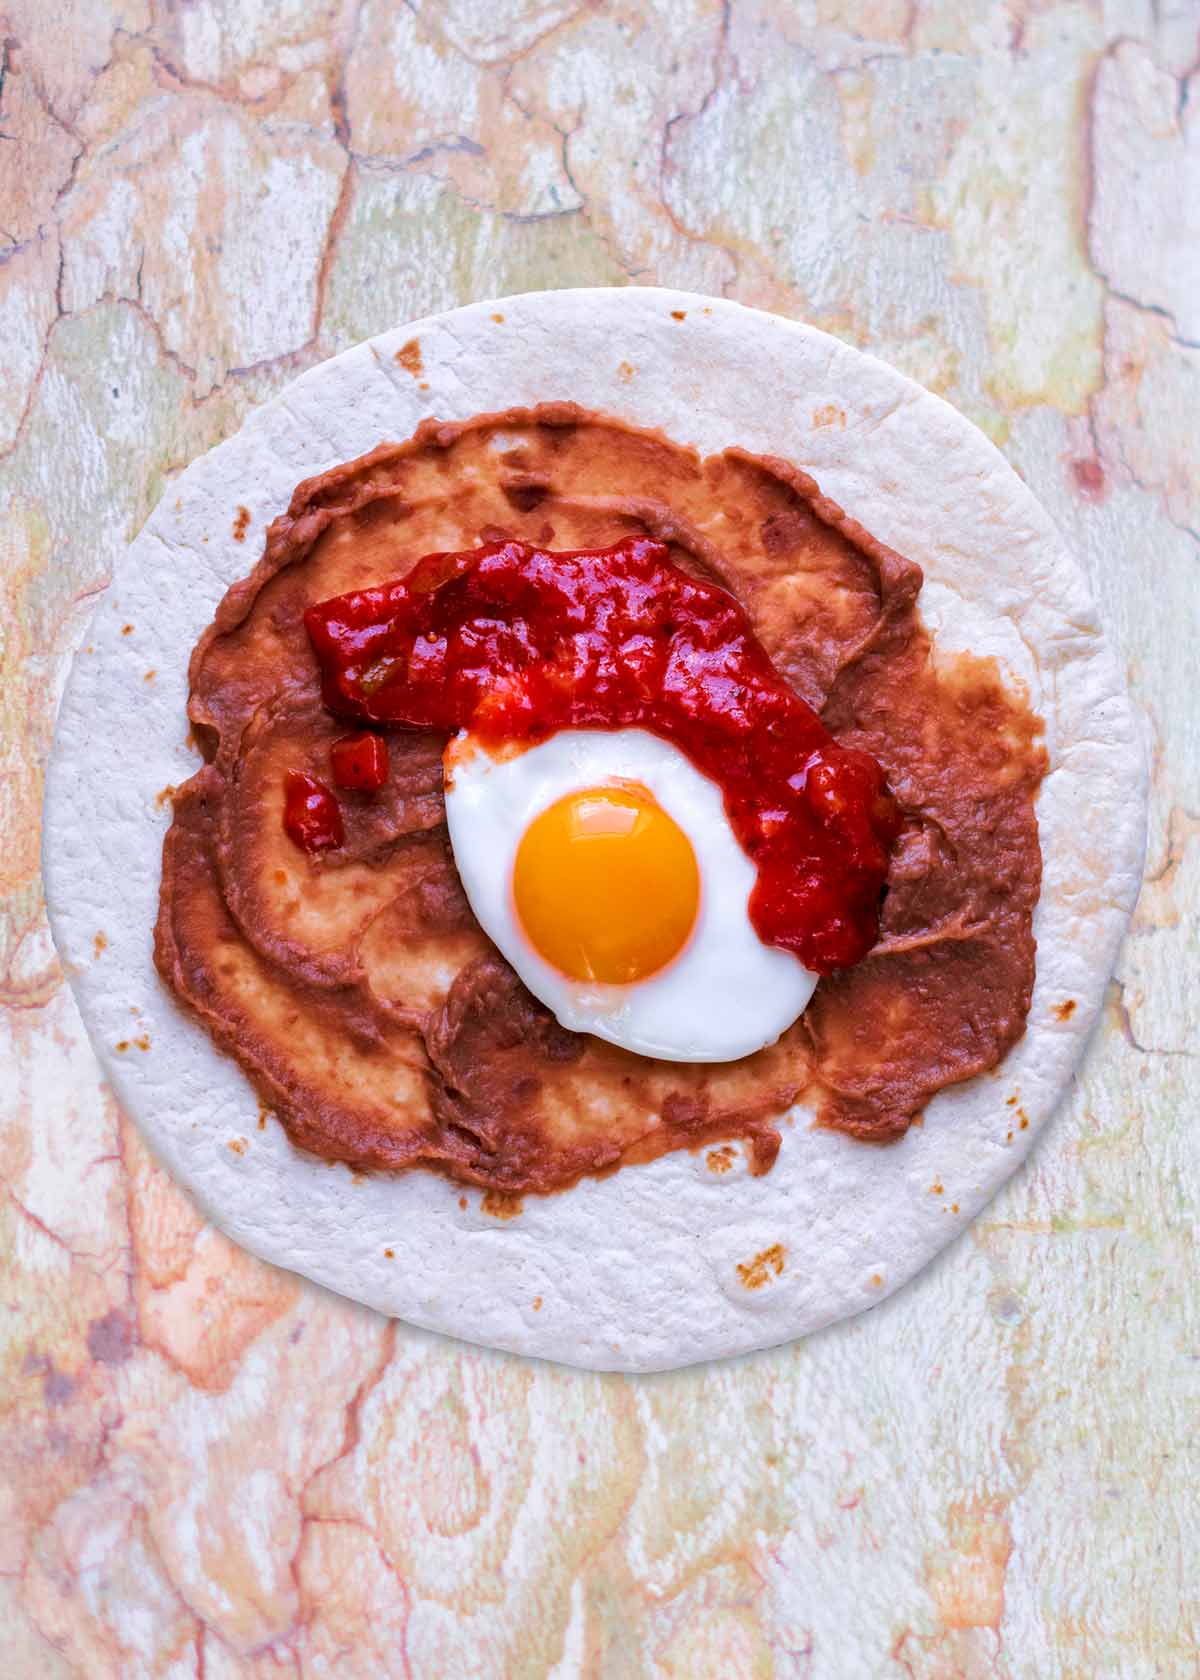 A flour tortilla spread with refried beans and a fried egg and salsa on top.